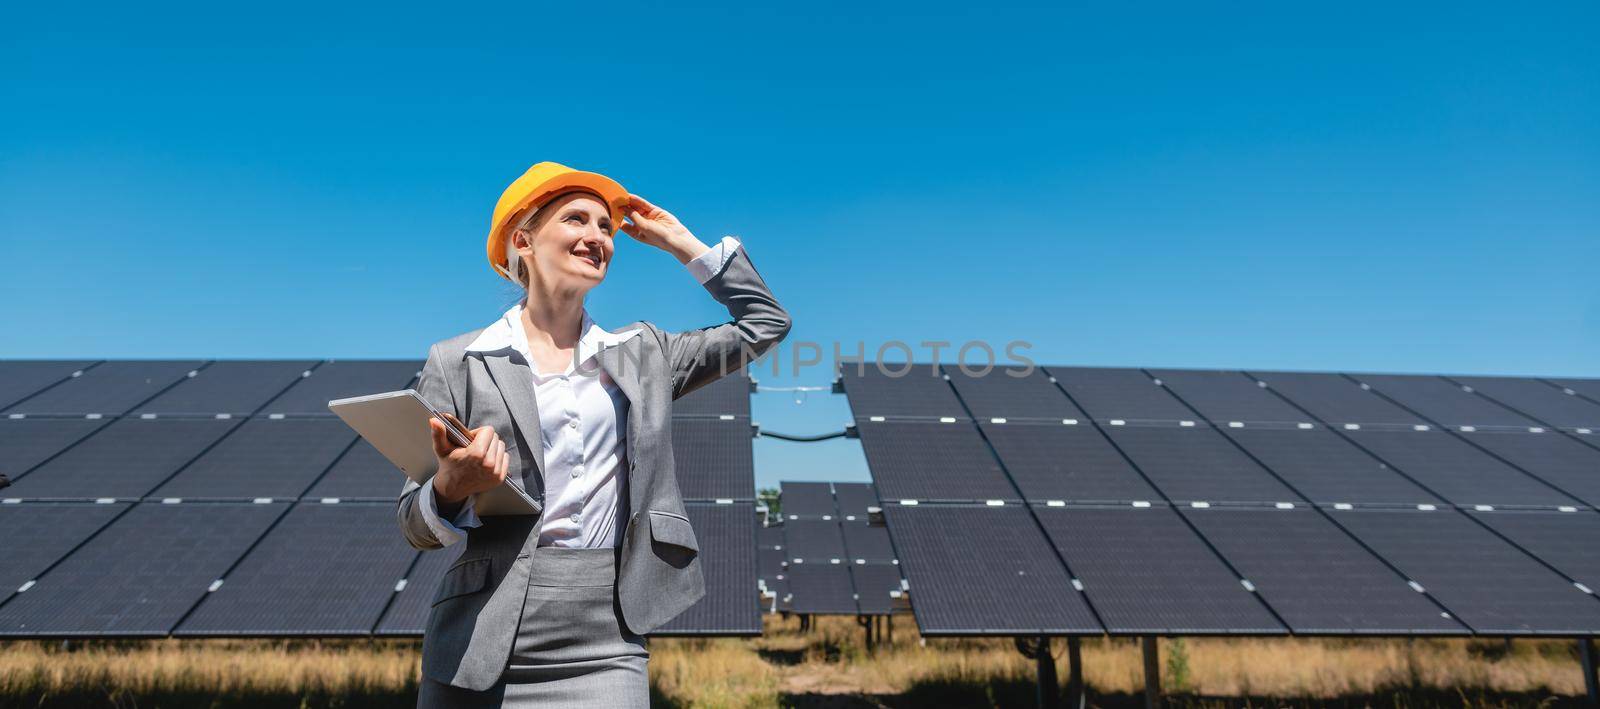 Business woman or investor inspecting her solar farm by Kzenon